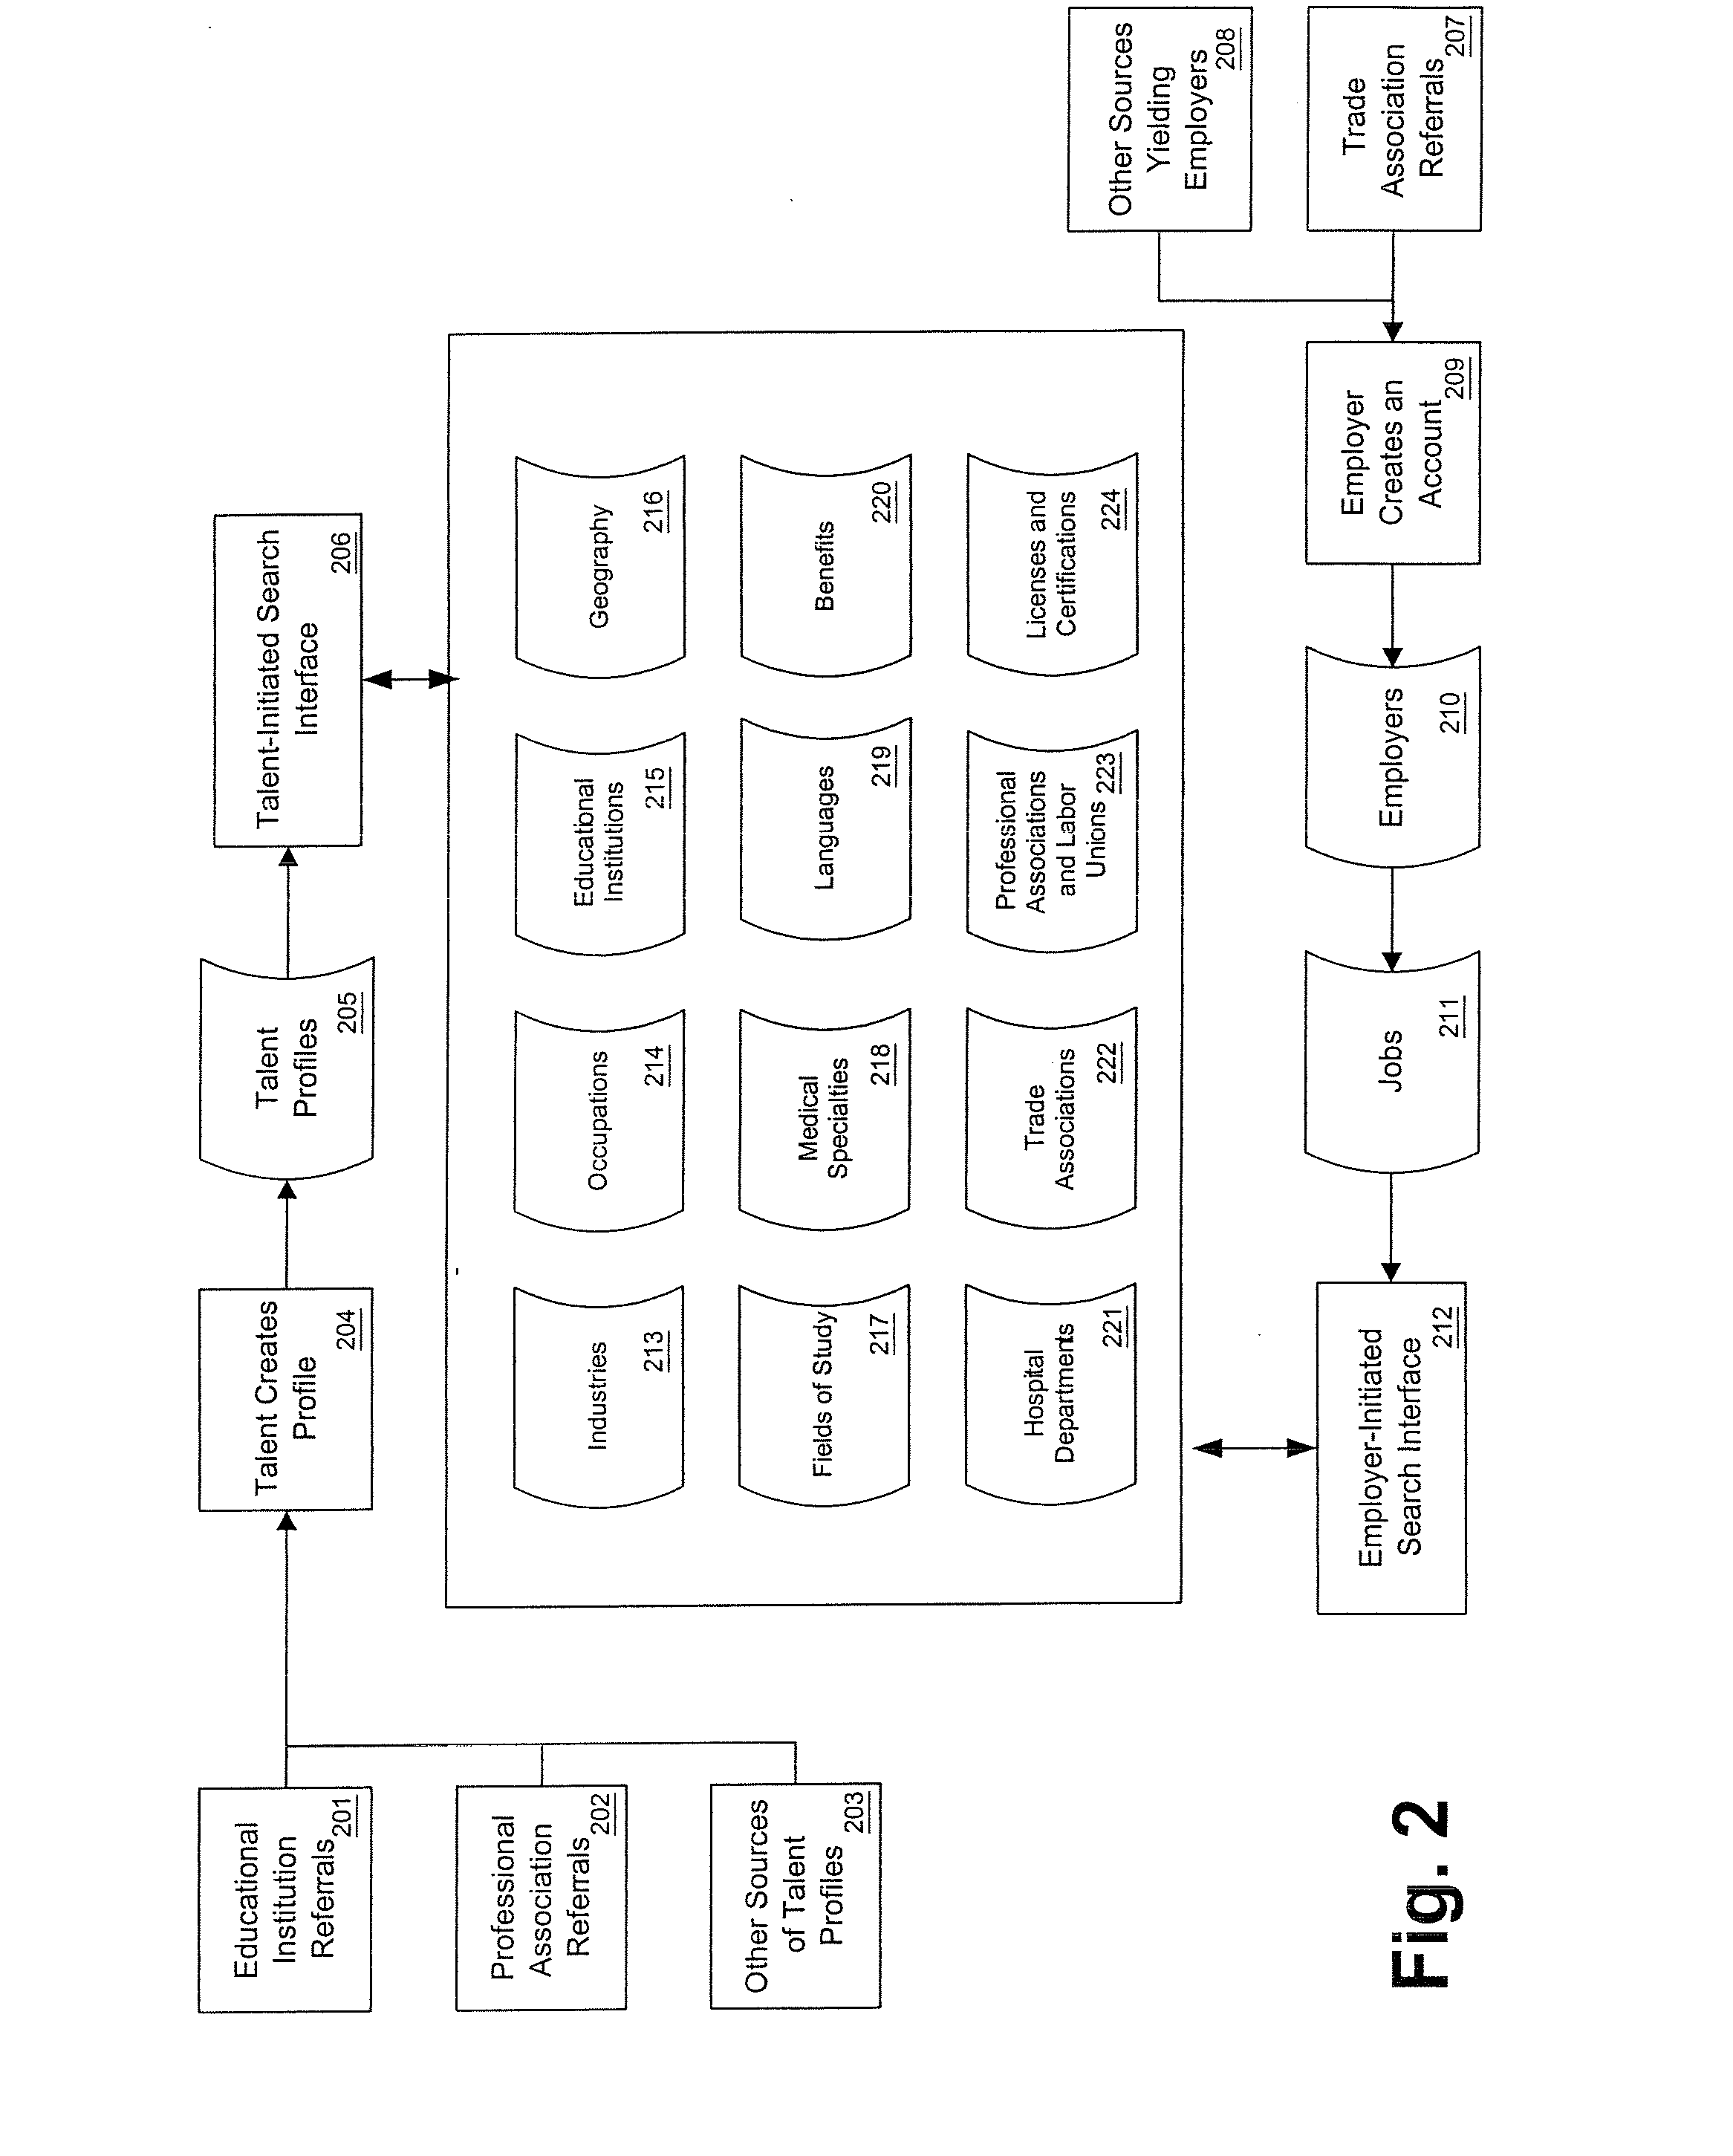 Apparatus and methods for providing career employment services